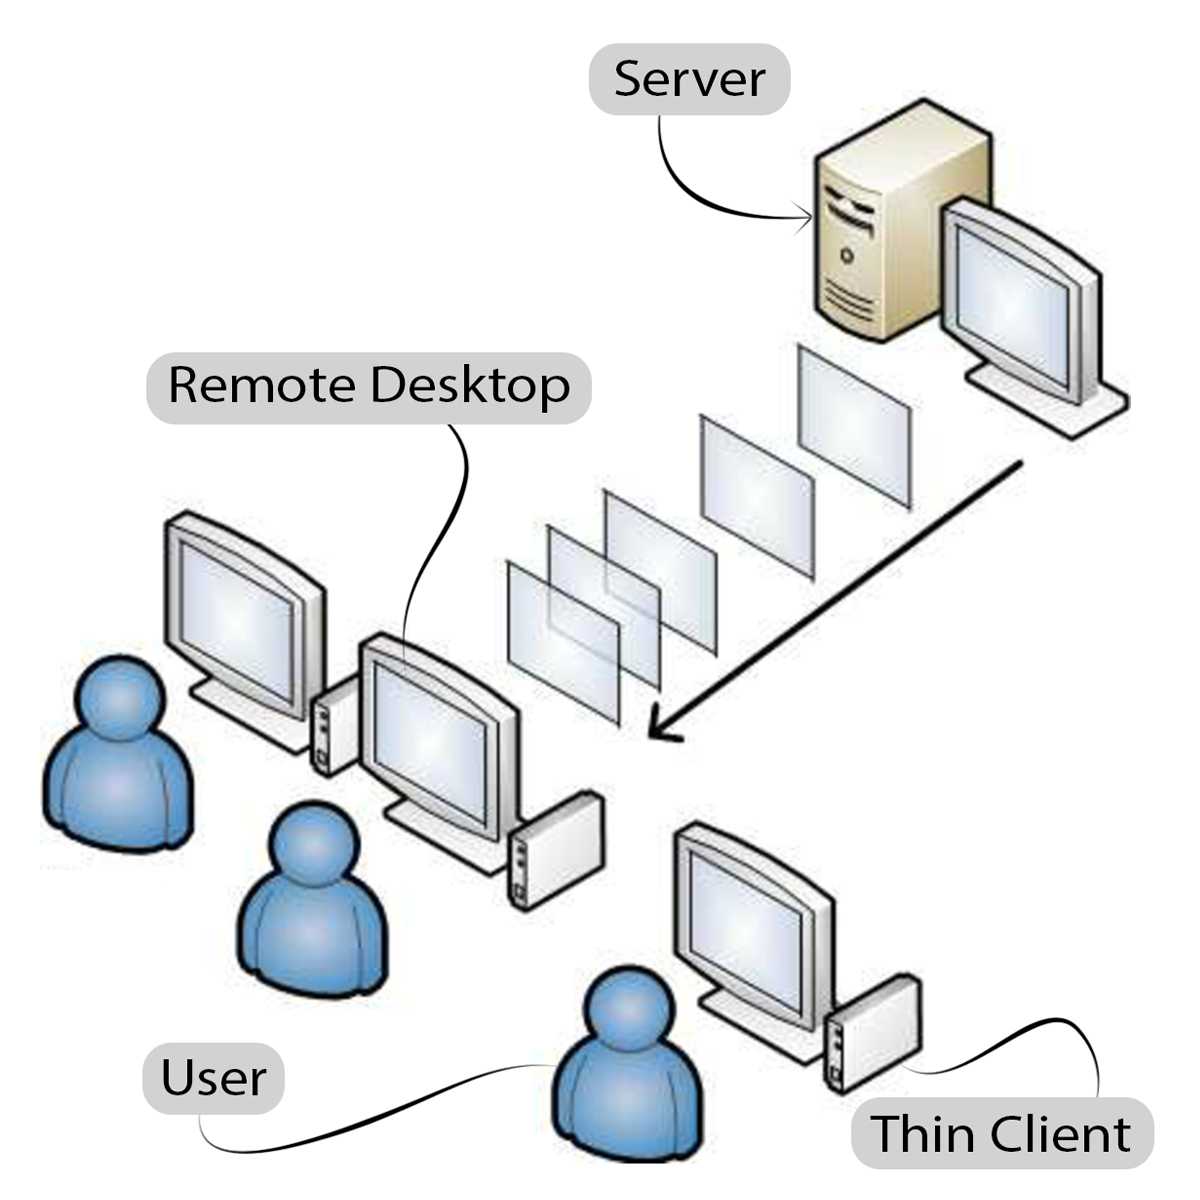 How Thin Client Works